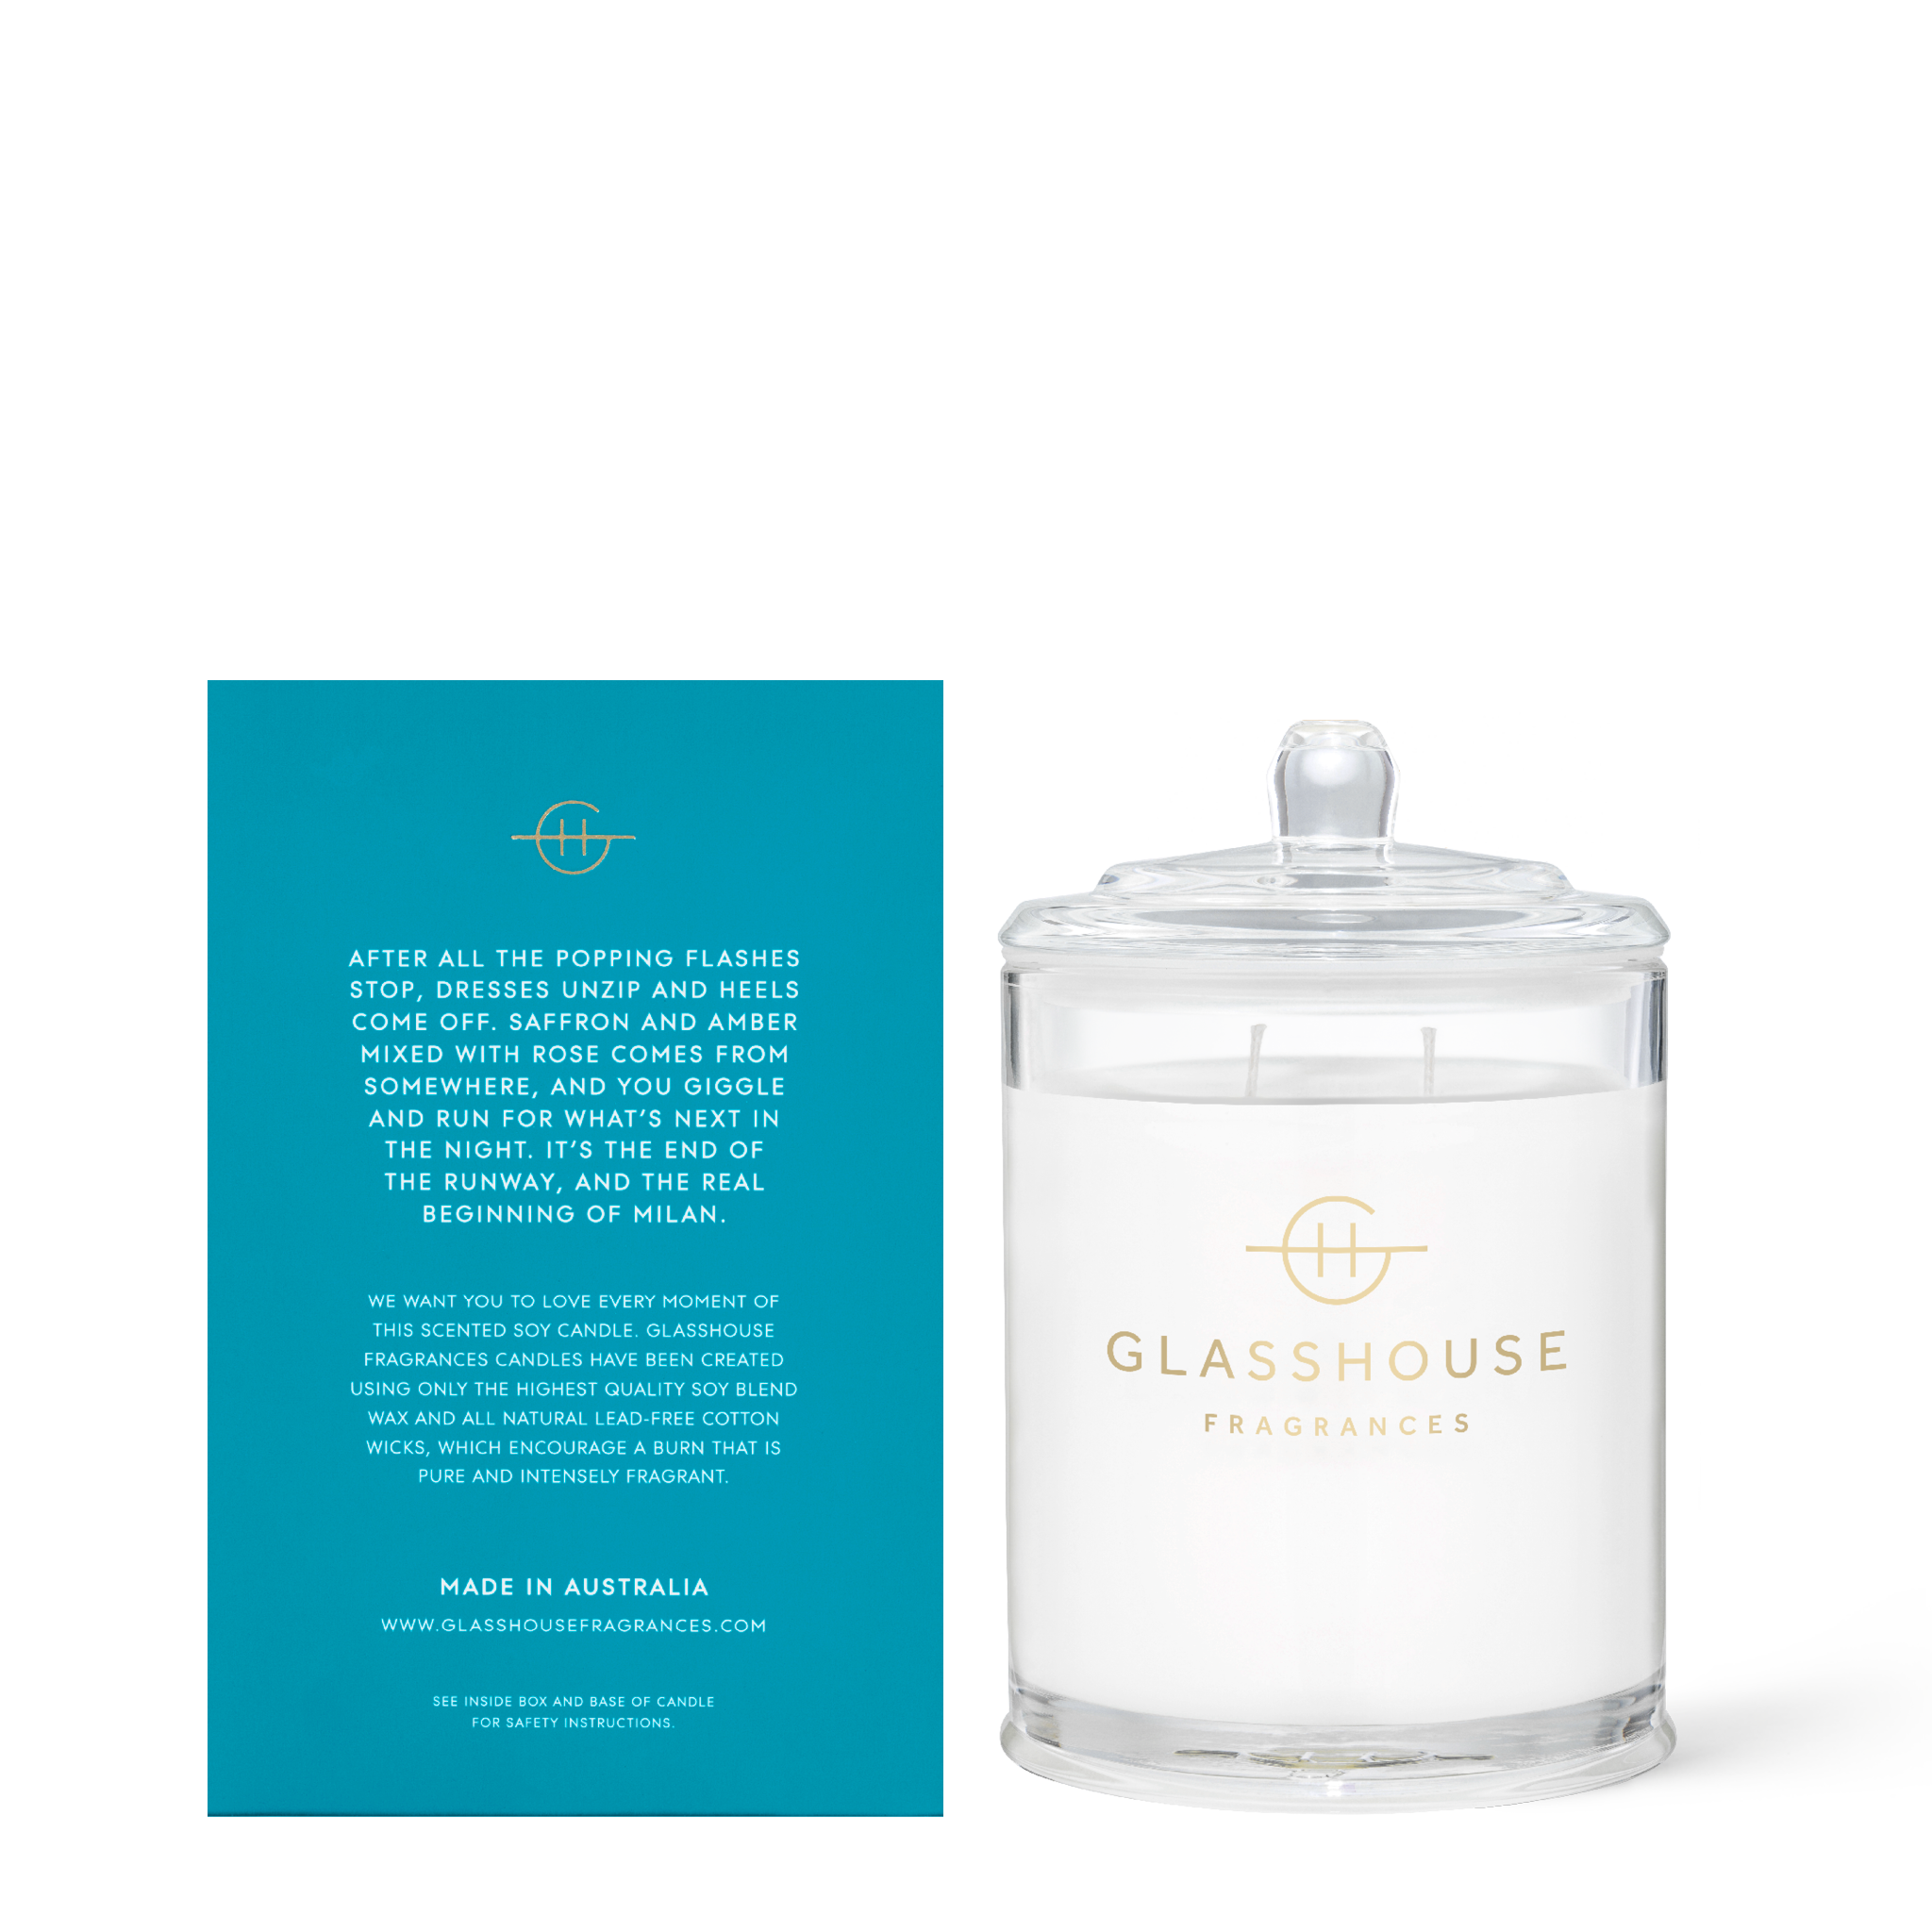 Glasshouse Fragrances Midnight in Milan Saffron and Rose 380g Soy Candle with box - back of product shot